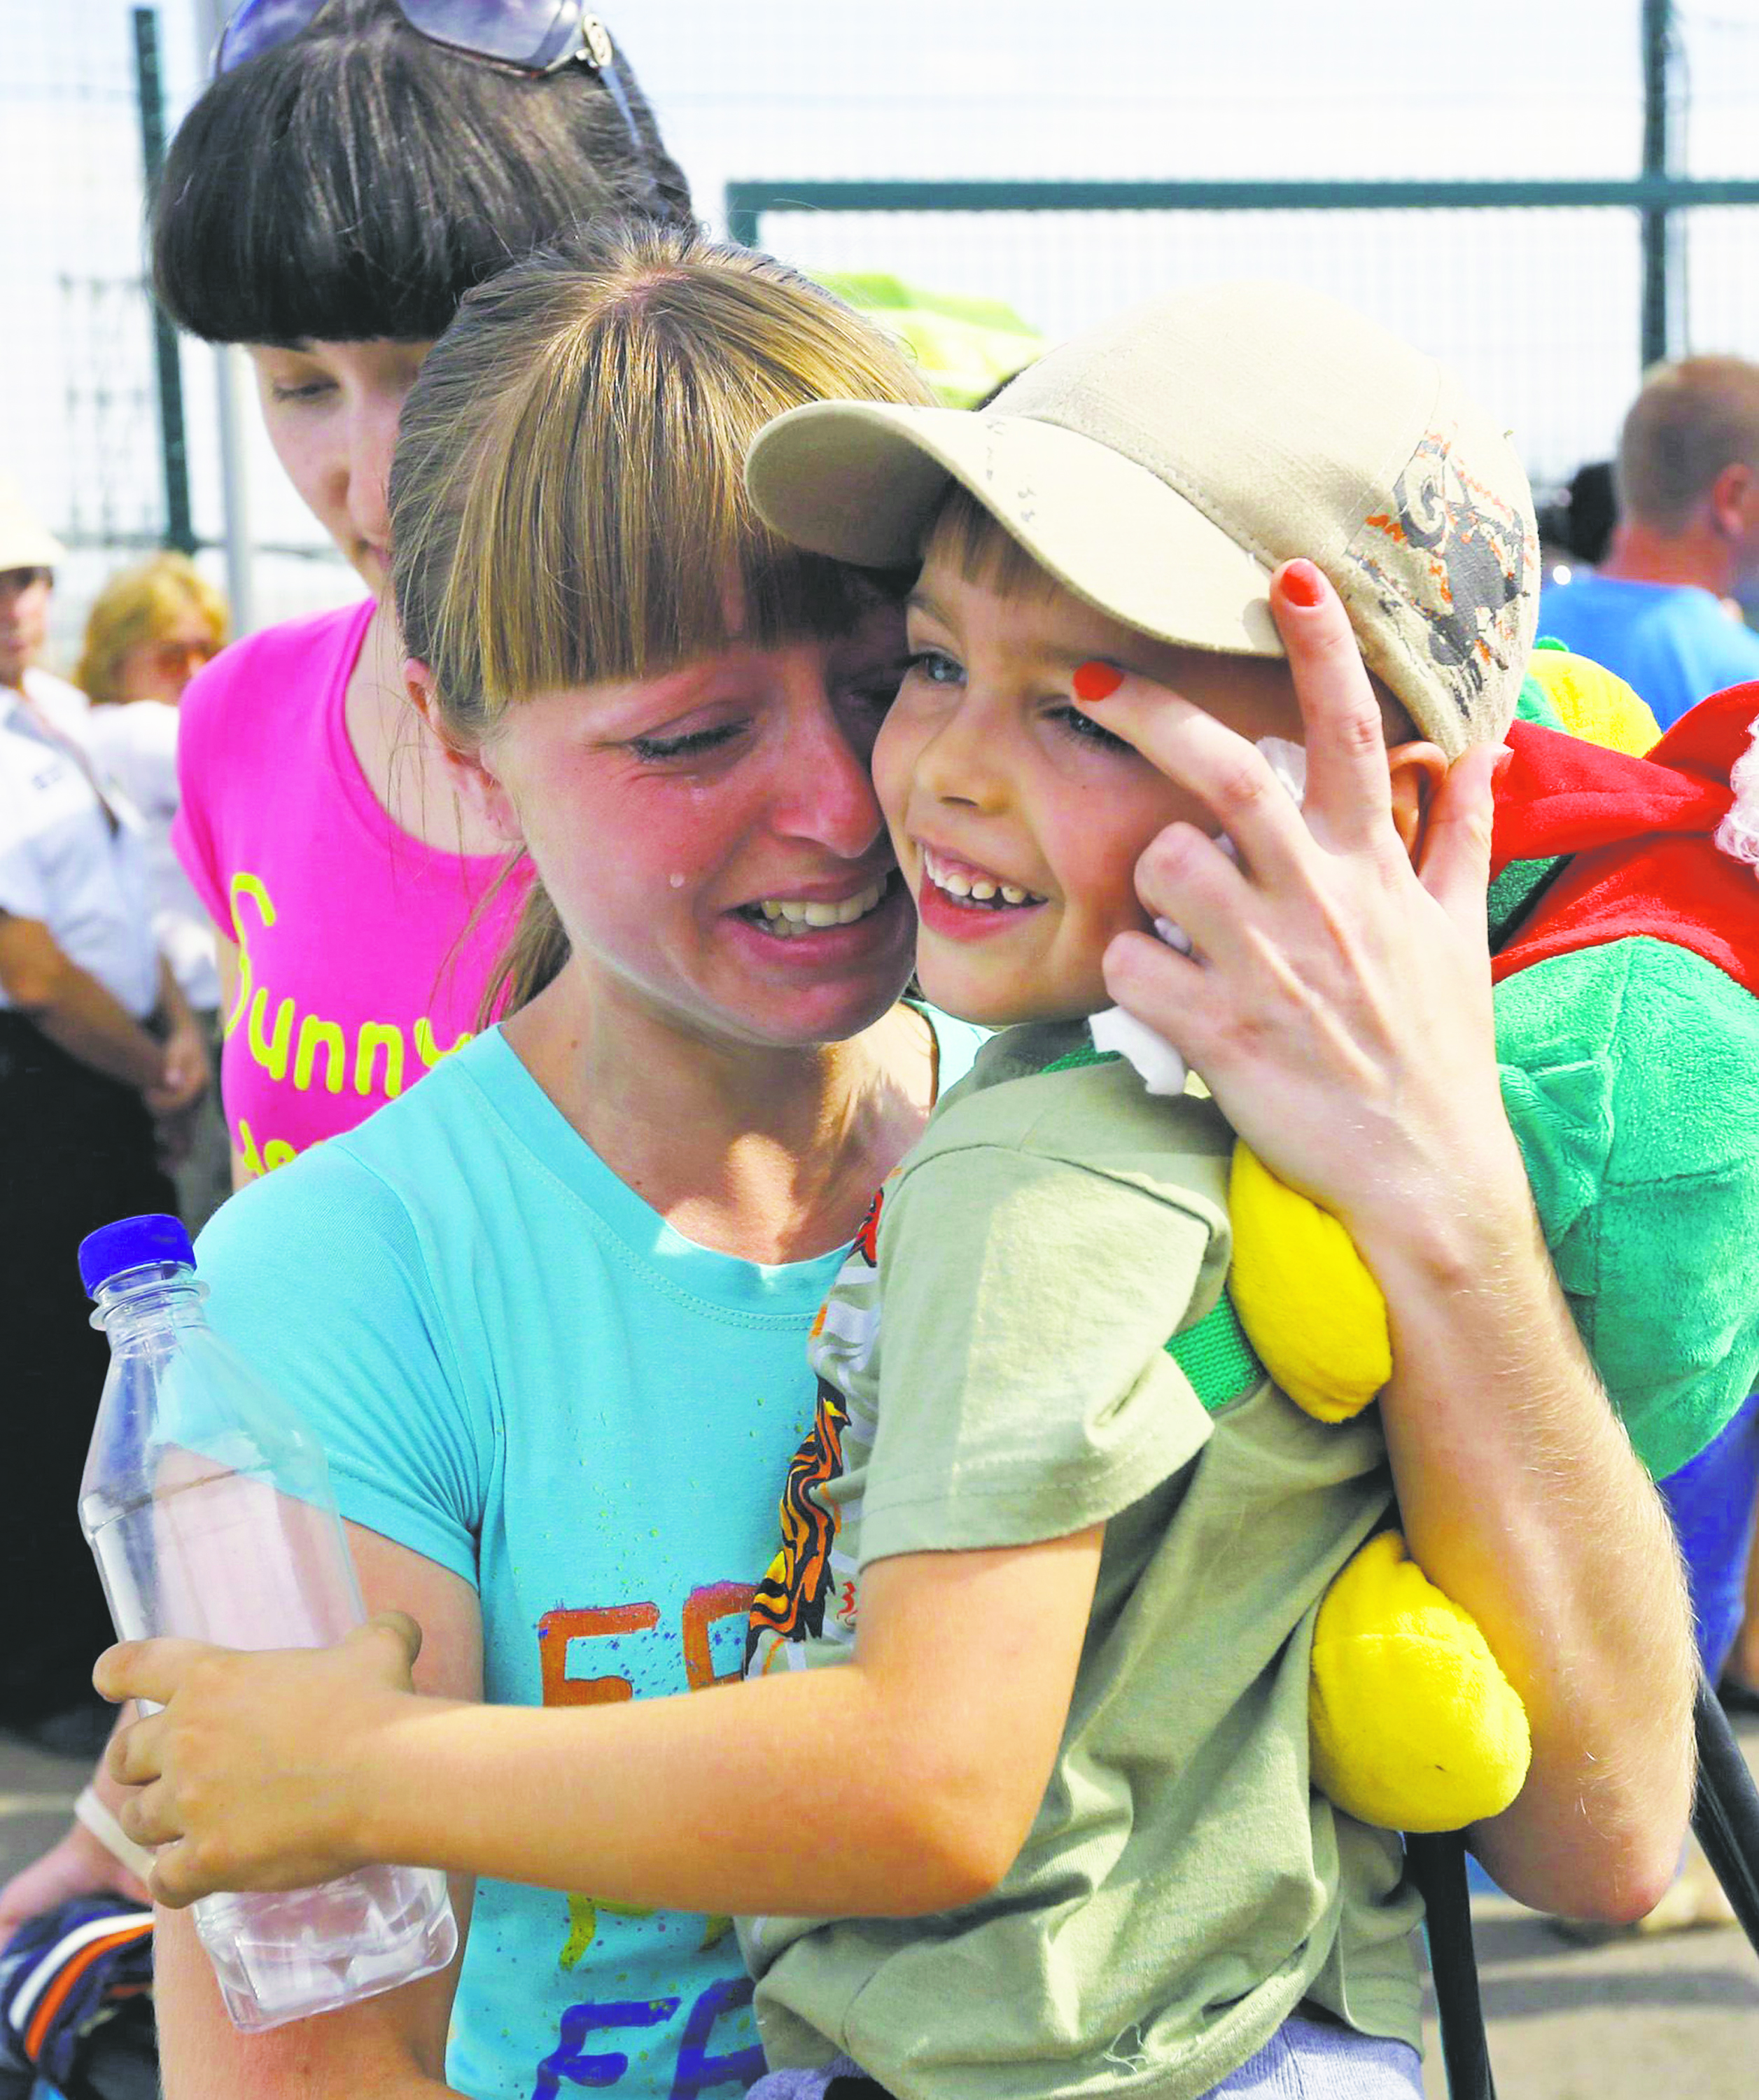 A Ukrainian woman cries tears of joy after being reunited with her son at the Russia-Ukraine border Aug. 22. As Ukrainians marked their Independence Day Aug. 24 amid ongoing tensions, Pope Francis prayed for “peace and tranquility” there.